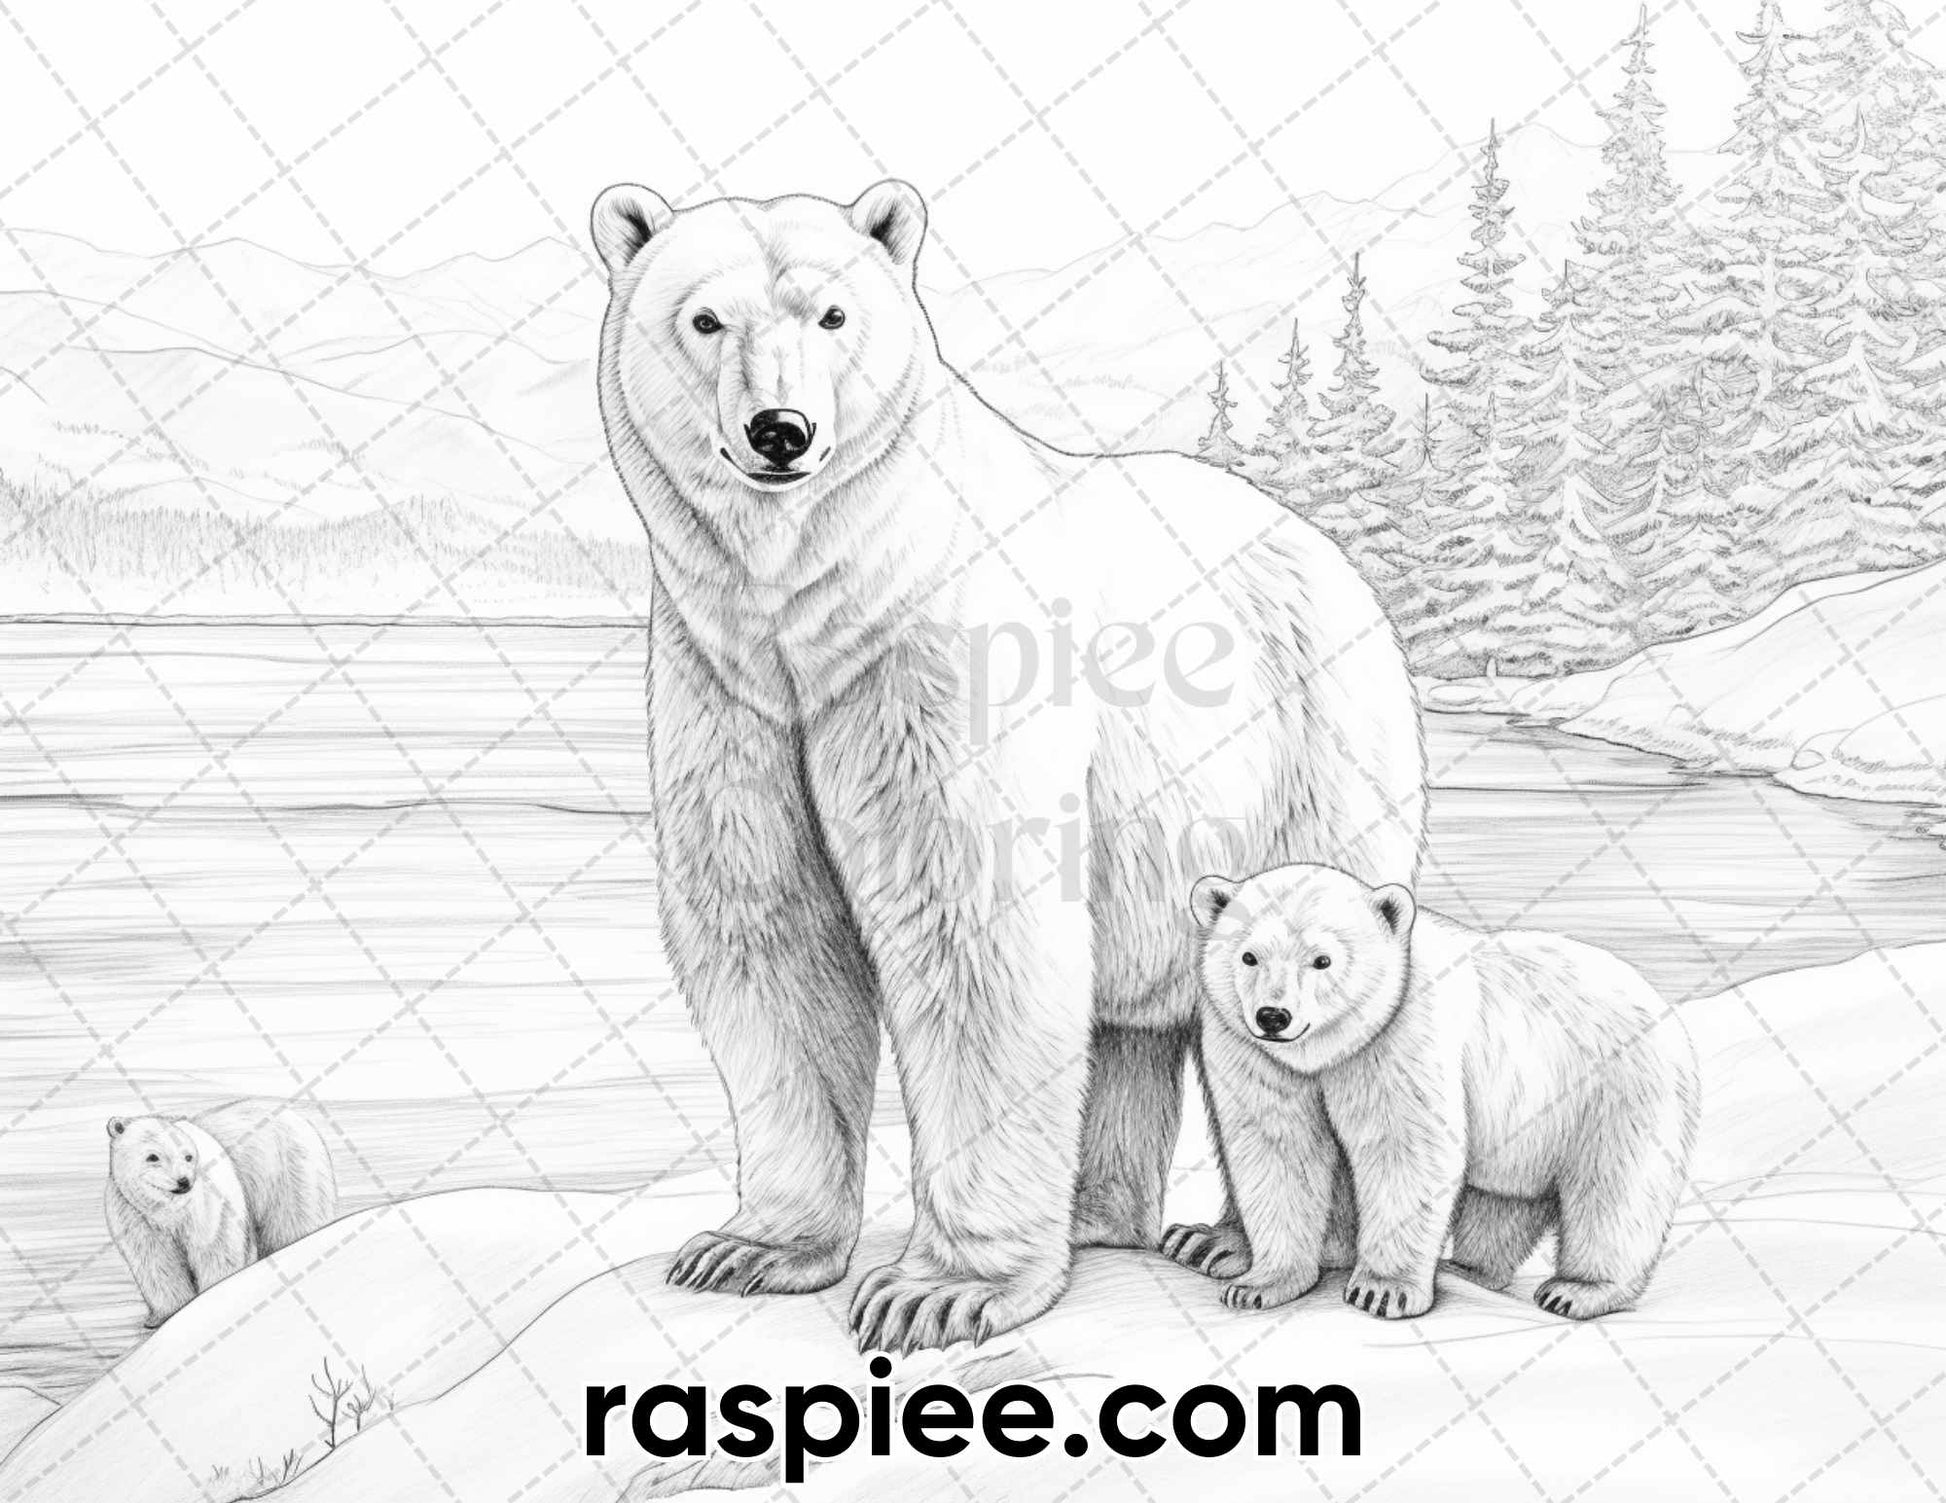 50 Winter Wonderland Grayscale Coloring Pages for Adults, Printable PDF  Instant Download